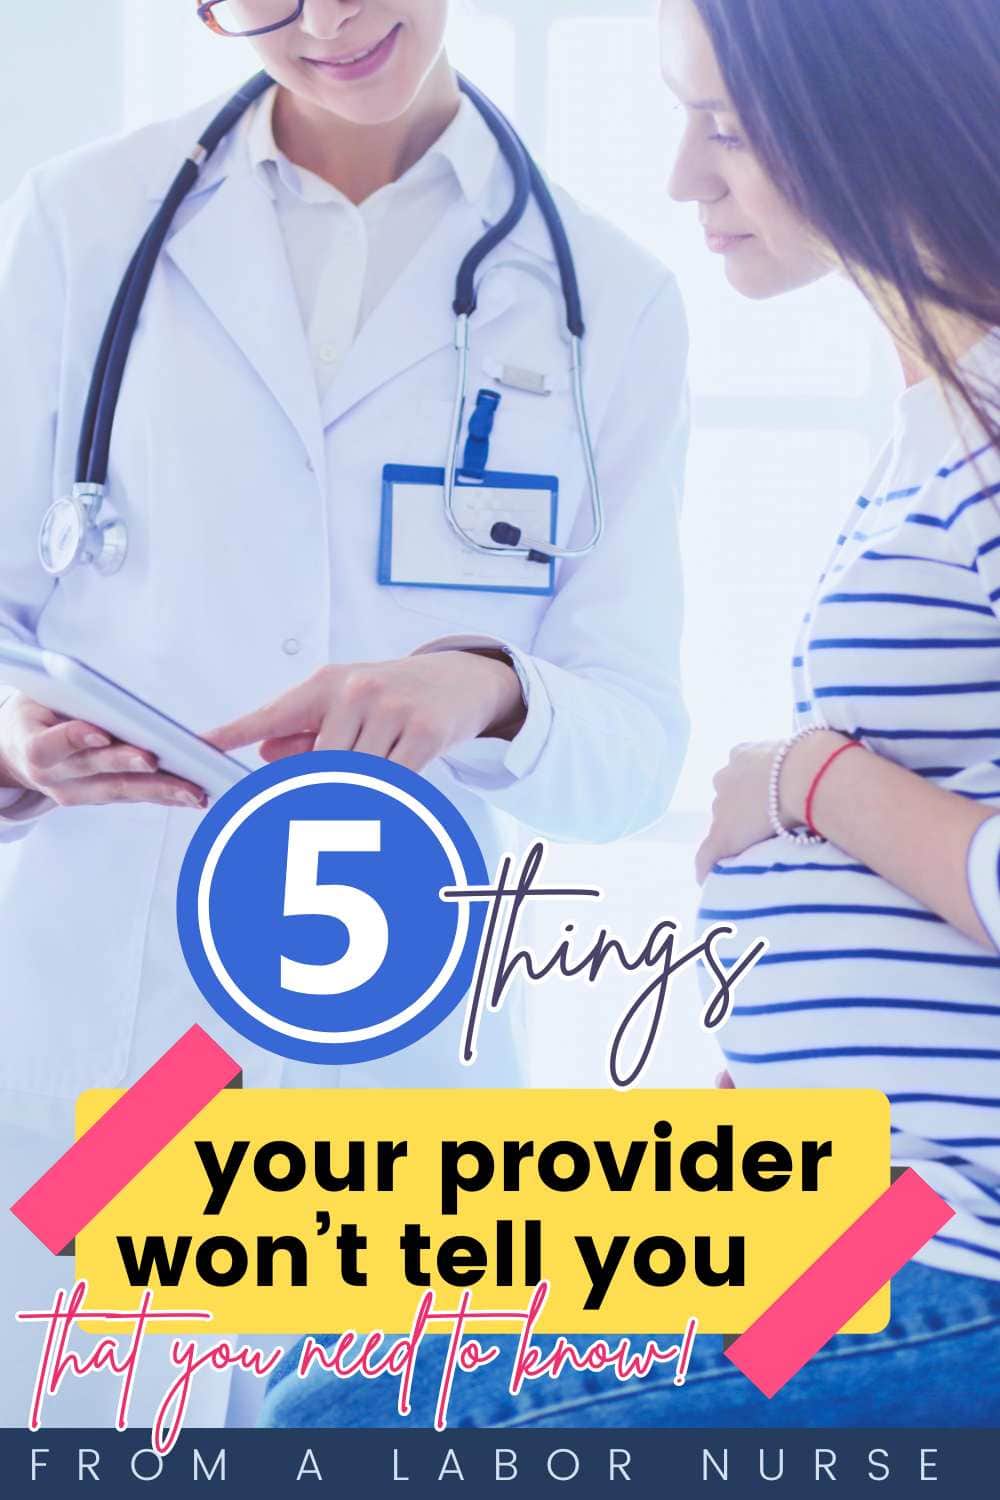 Navigating the world of pregnancy can be overwhelming. But fret not, this informative guide walks you through every detail of your birth plan. Get ahead of the game, know your risks, benefits and alternatives. via @pullingcurls